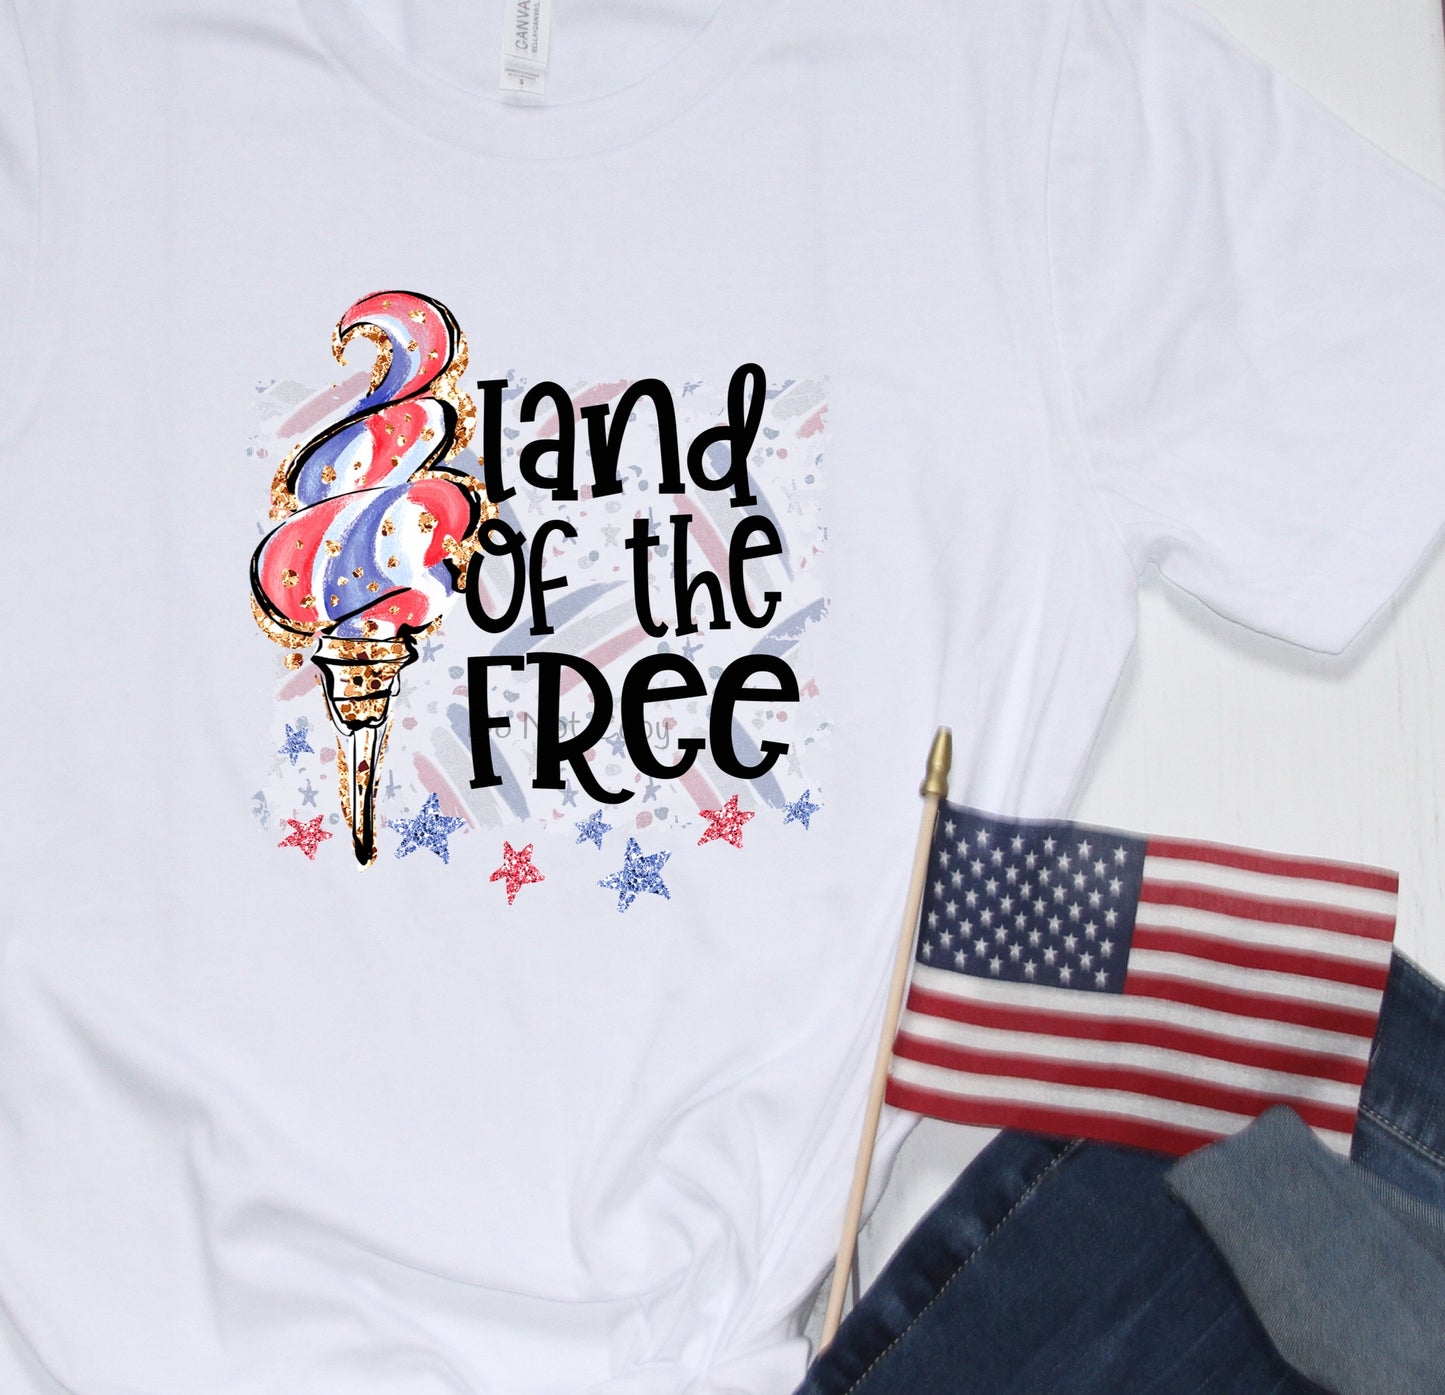 Land of the free-DTF